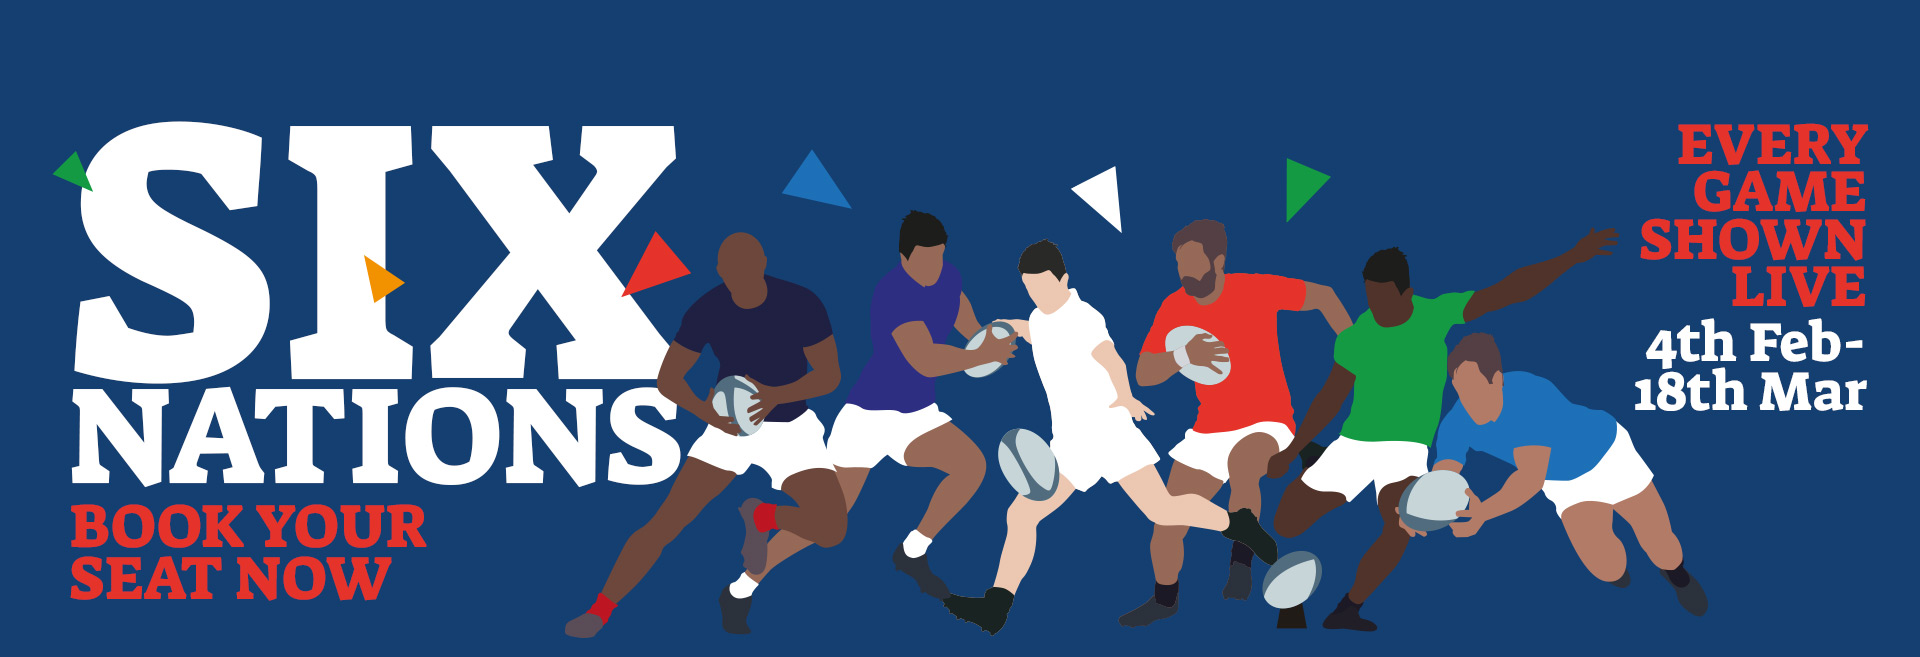 Watch Live 6 Nations Rugby at The Albany